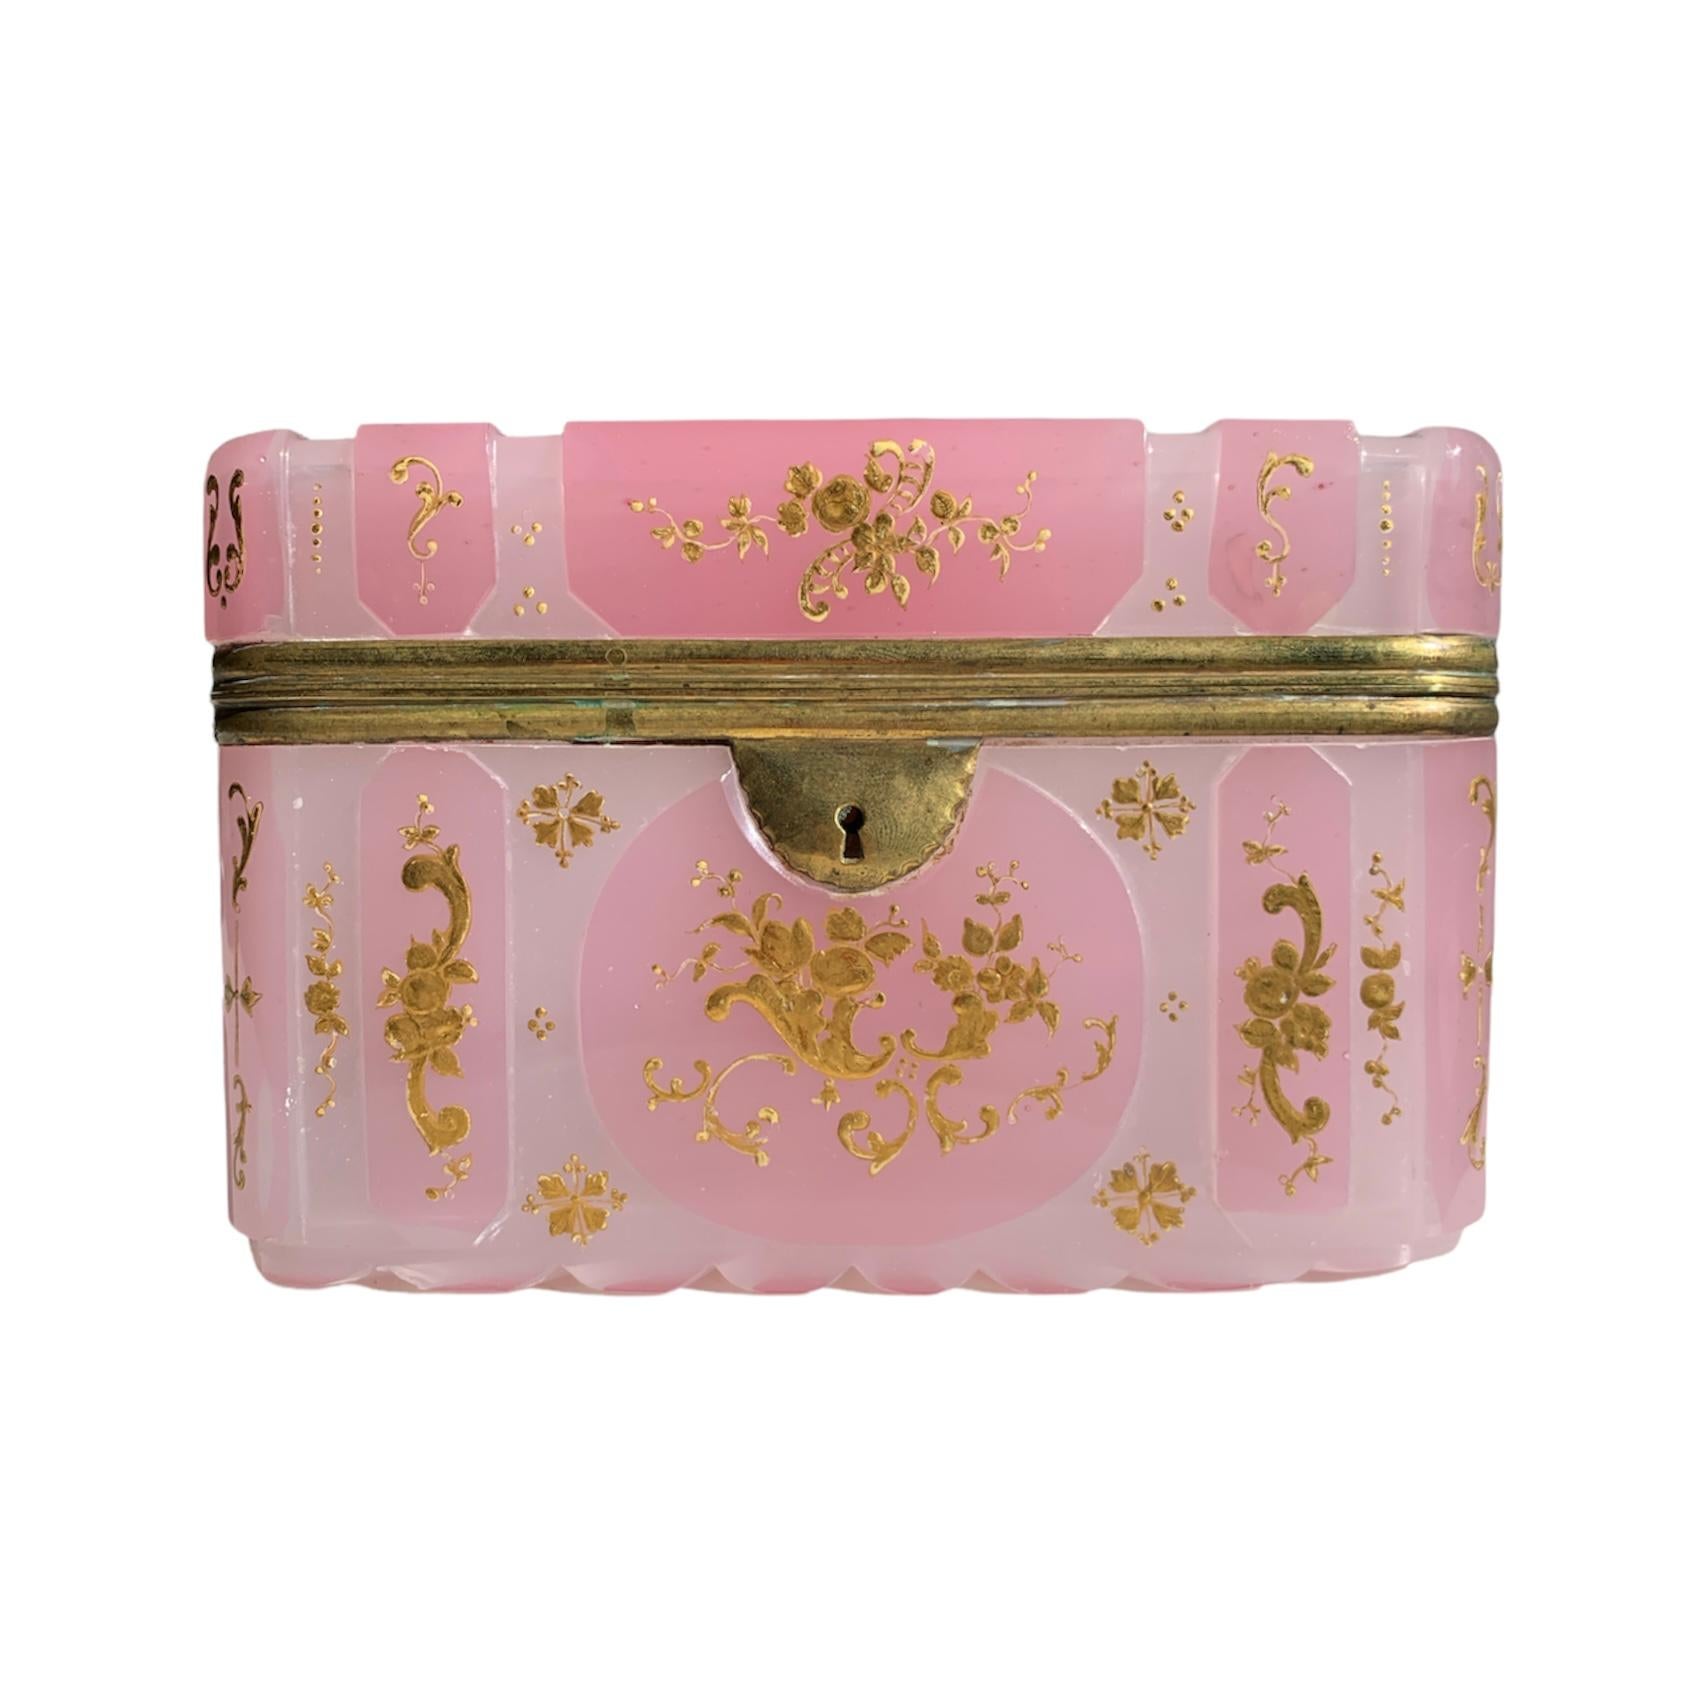 High-quality casket made of opal-alabaster overlay glass with metal mounts, cut and decorated all around with gilded enamel work, the white opaque glass is cased with a finely cut pink layer of opaque glass, all side panels are richly enameled with